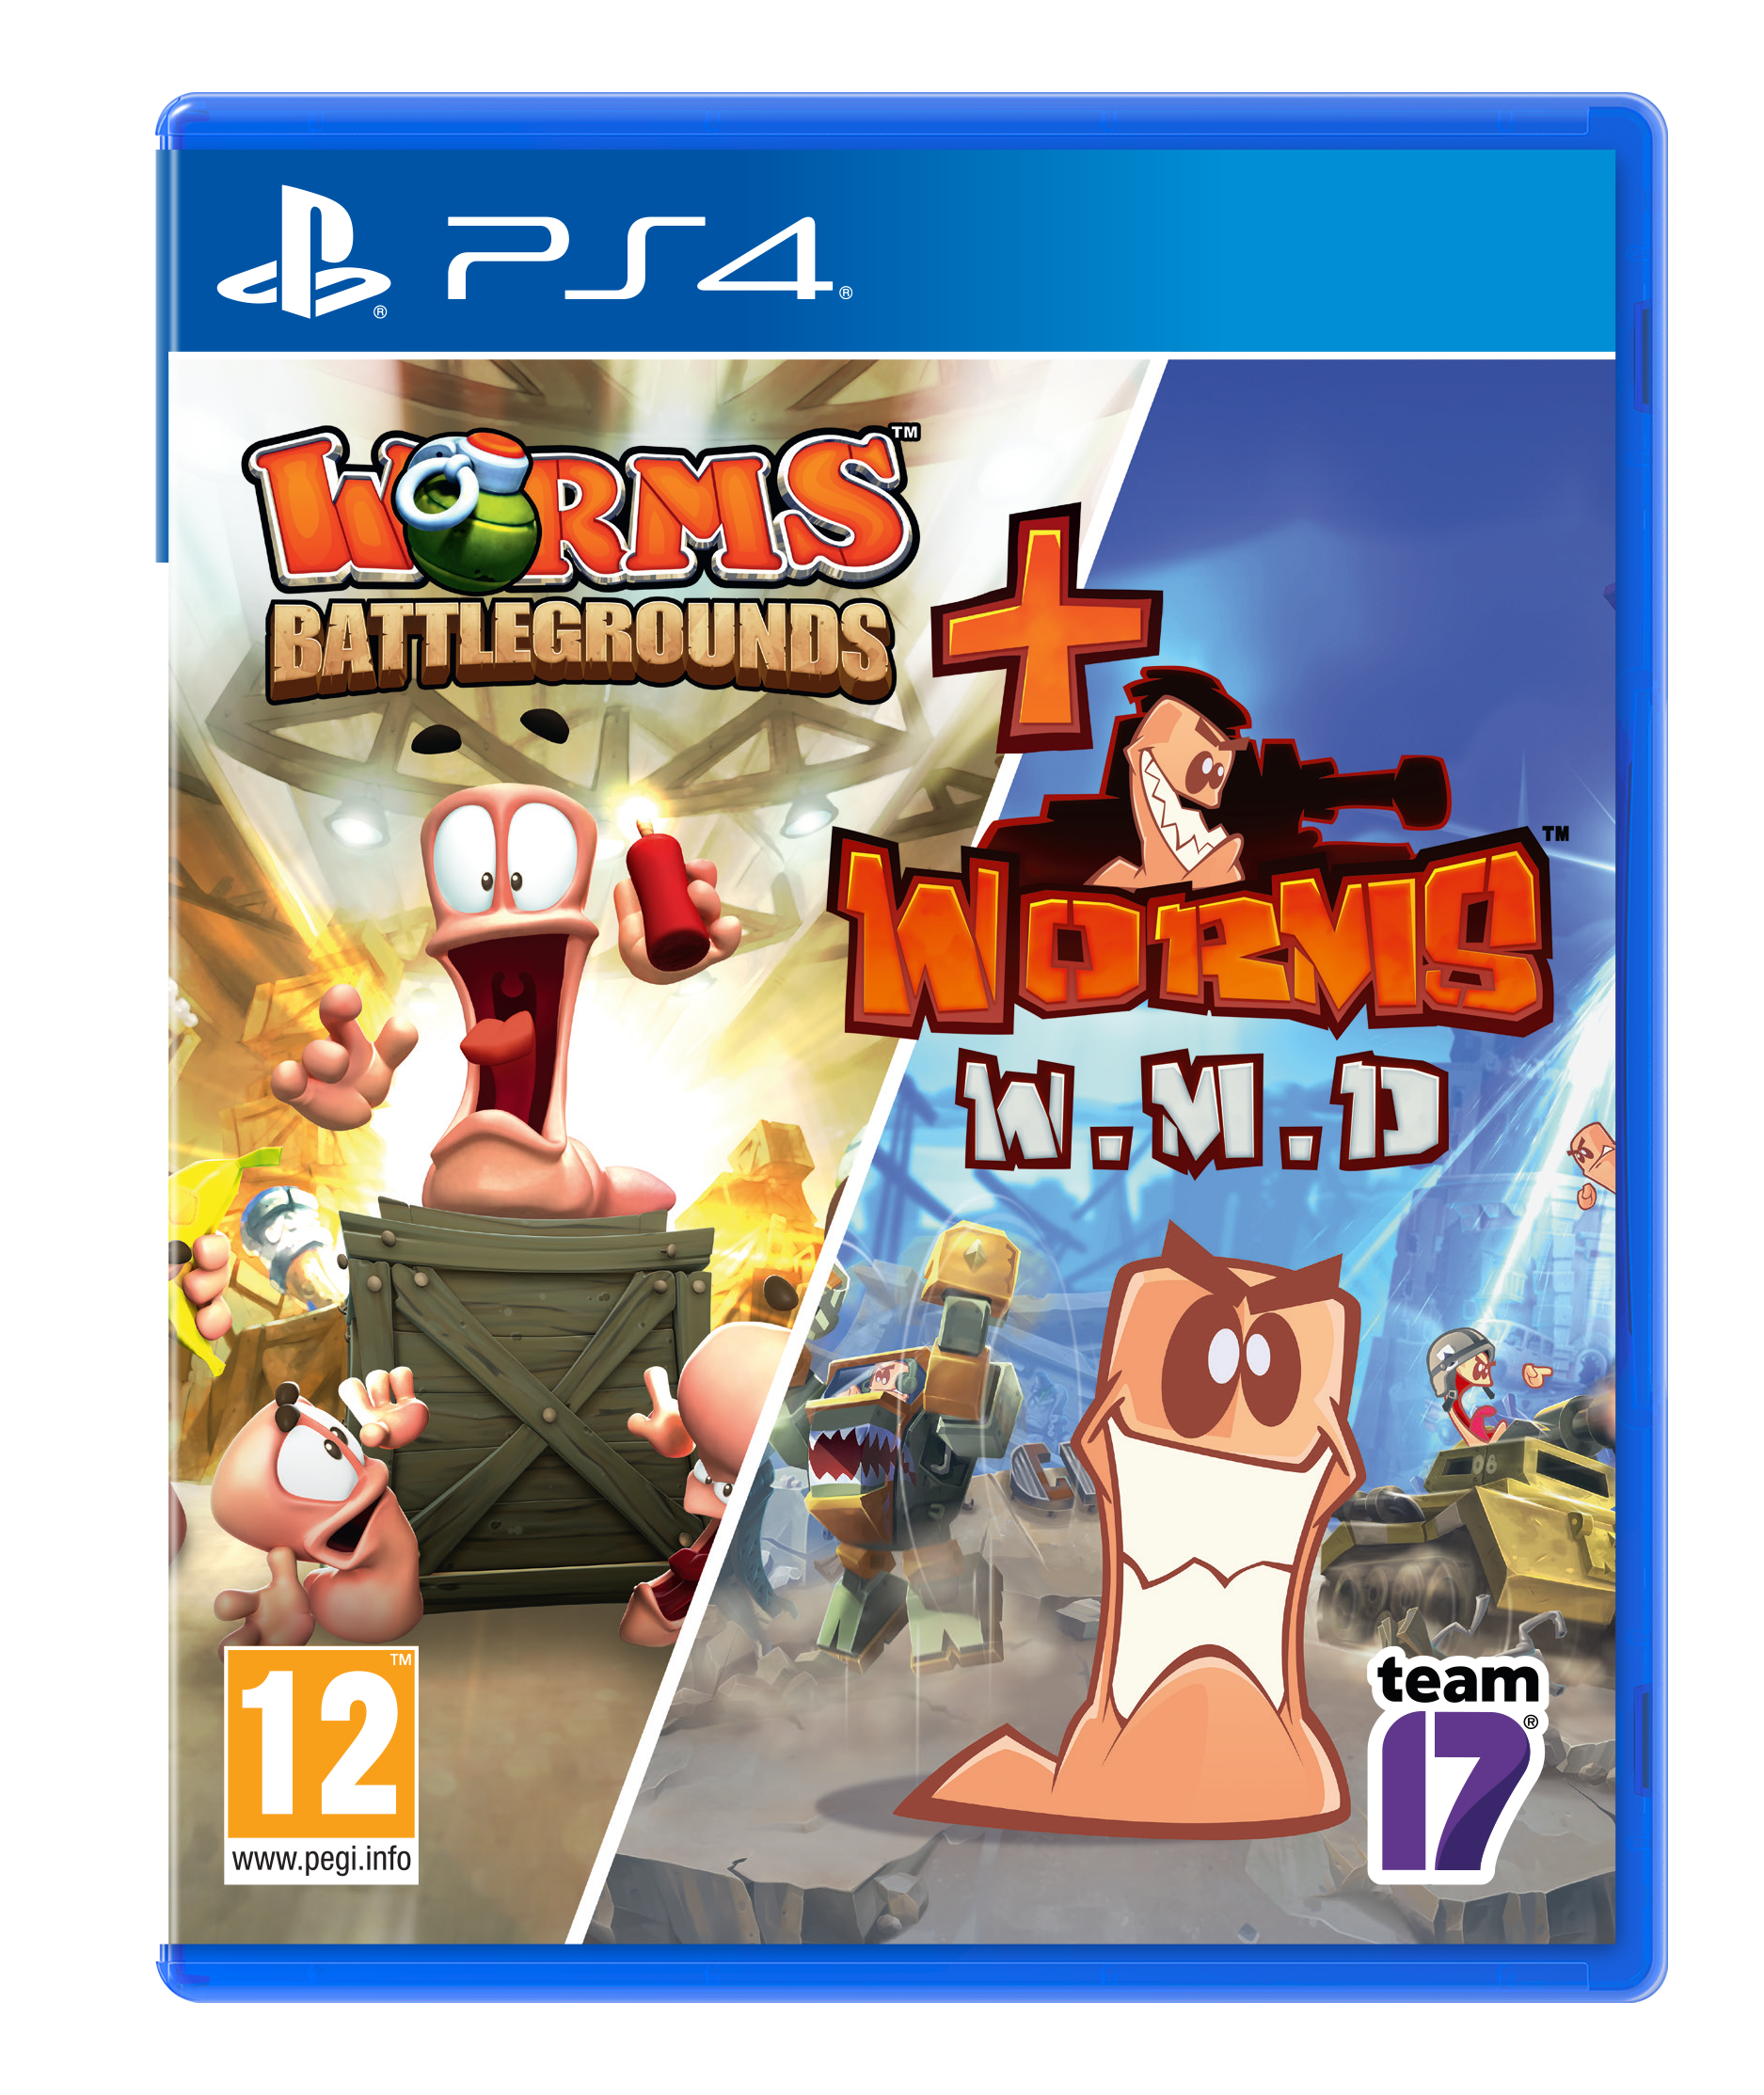 Worms Double Pack